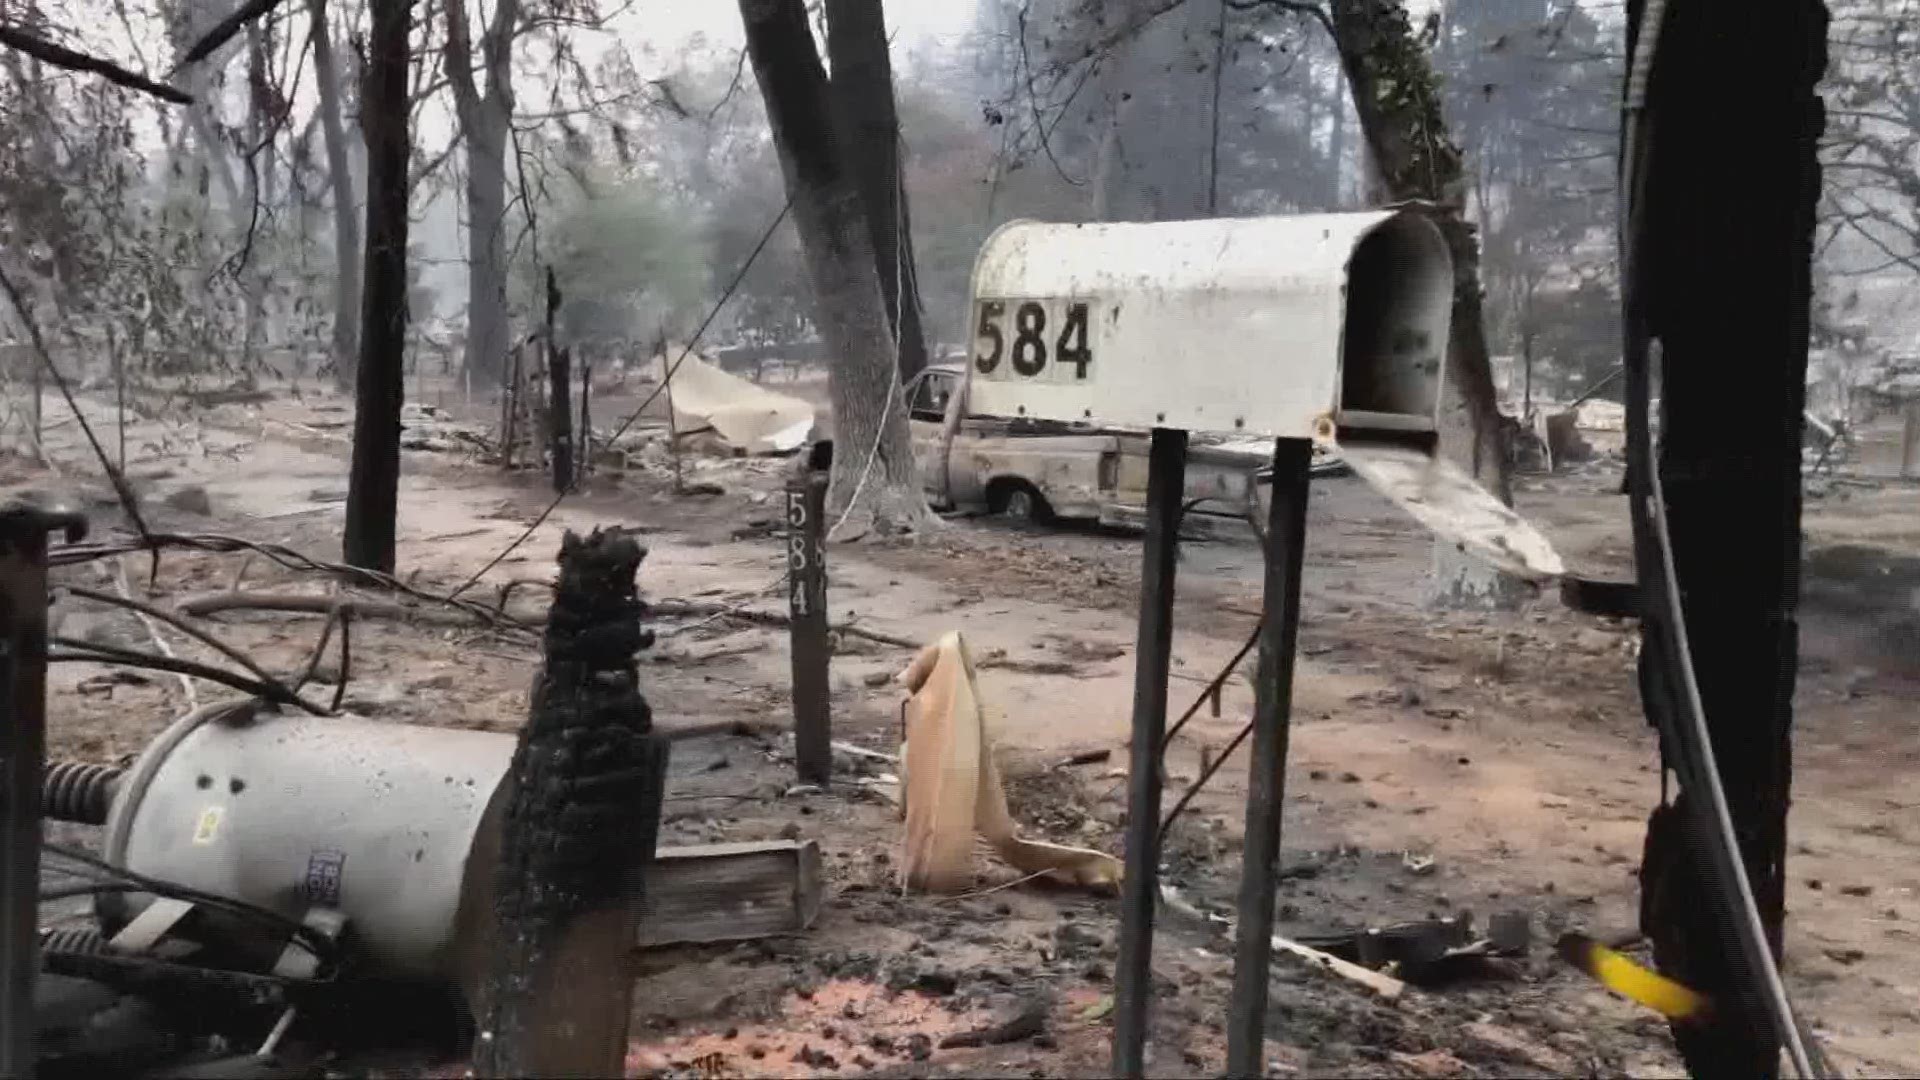 The California Fire Foundation’s Supplying Aid to Victims of Emergency program brings relief to victims of fire or other natural disasters throughout California.